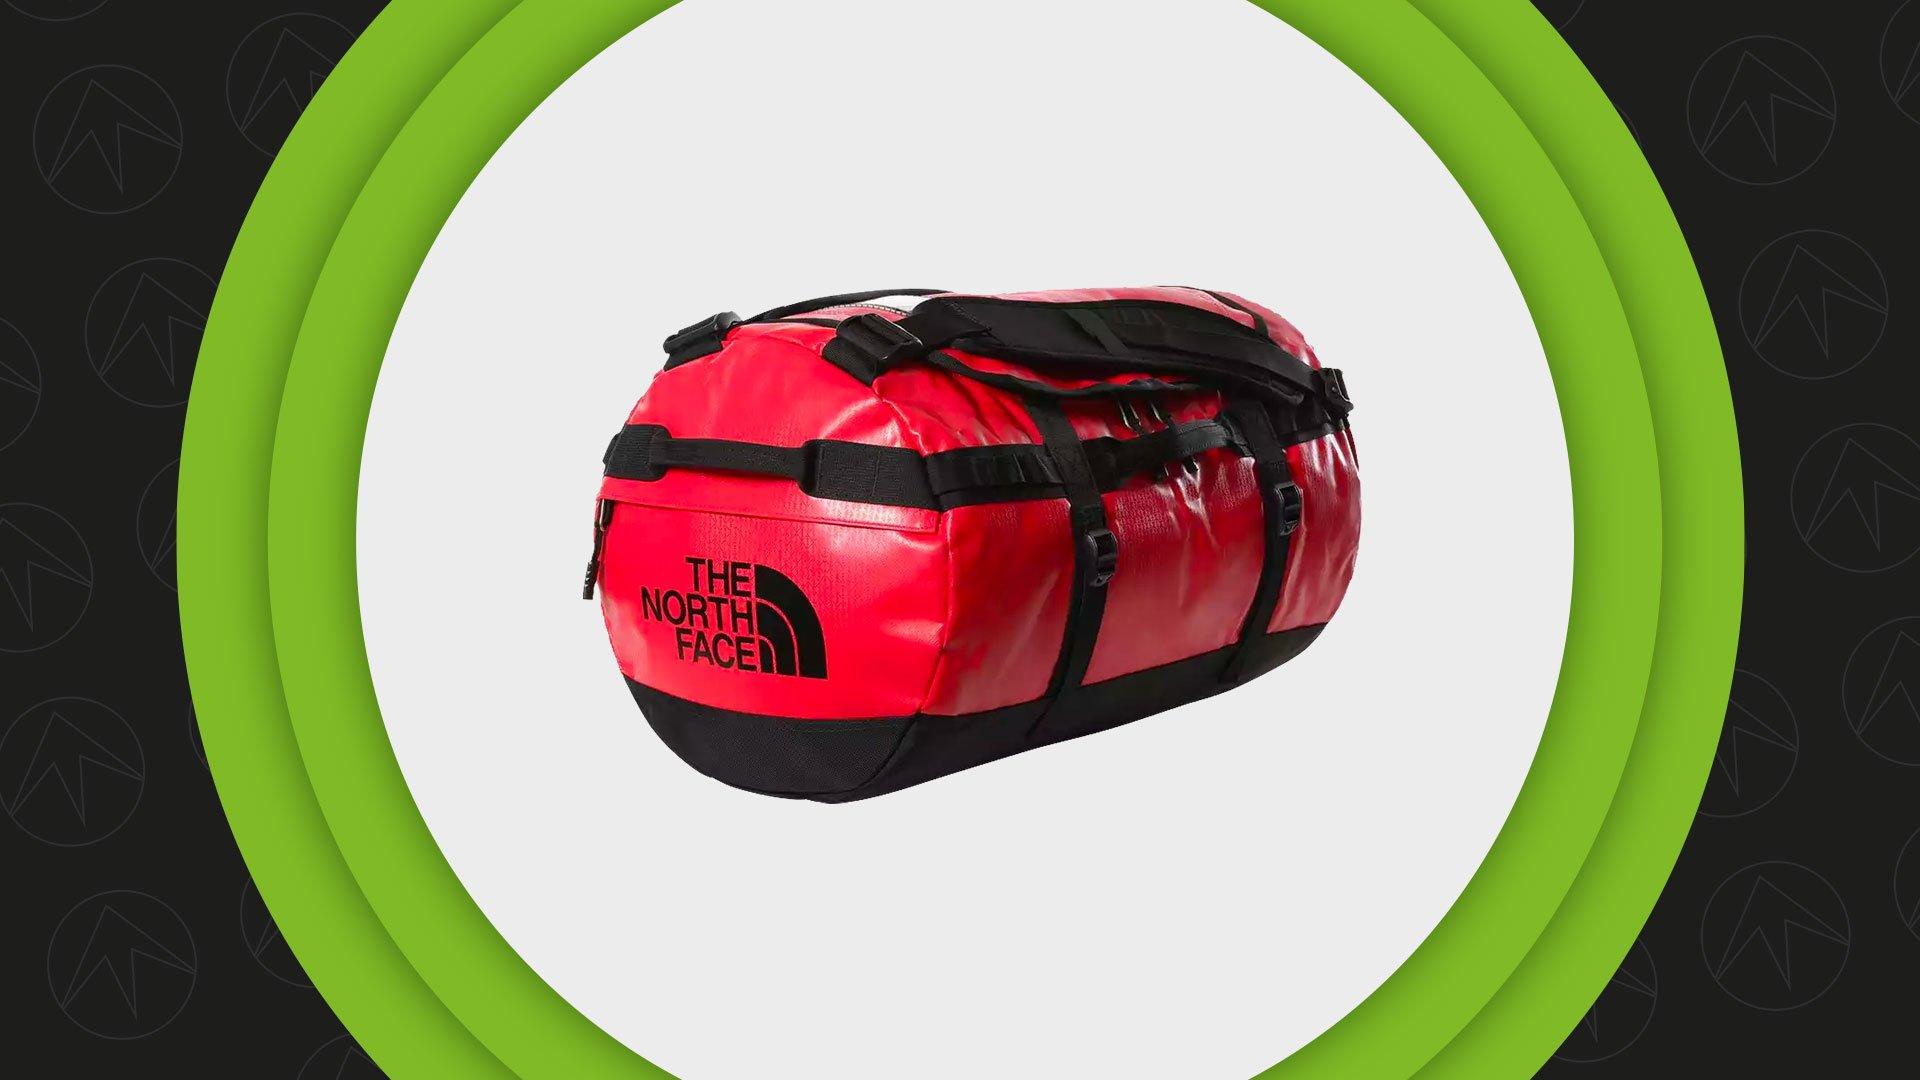 The North Face Basecamp Duffel Bag